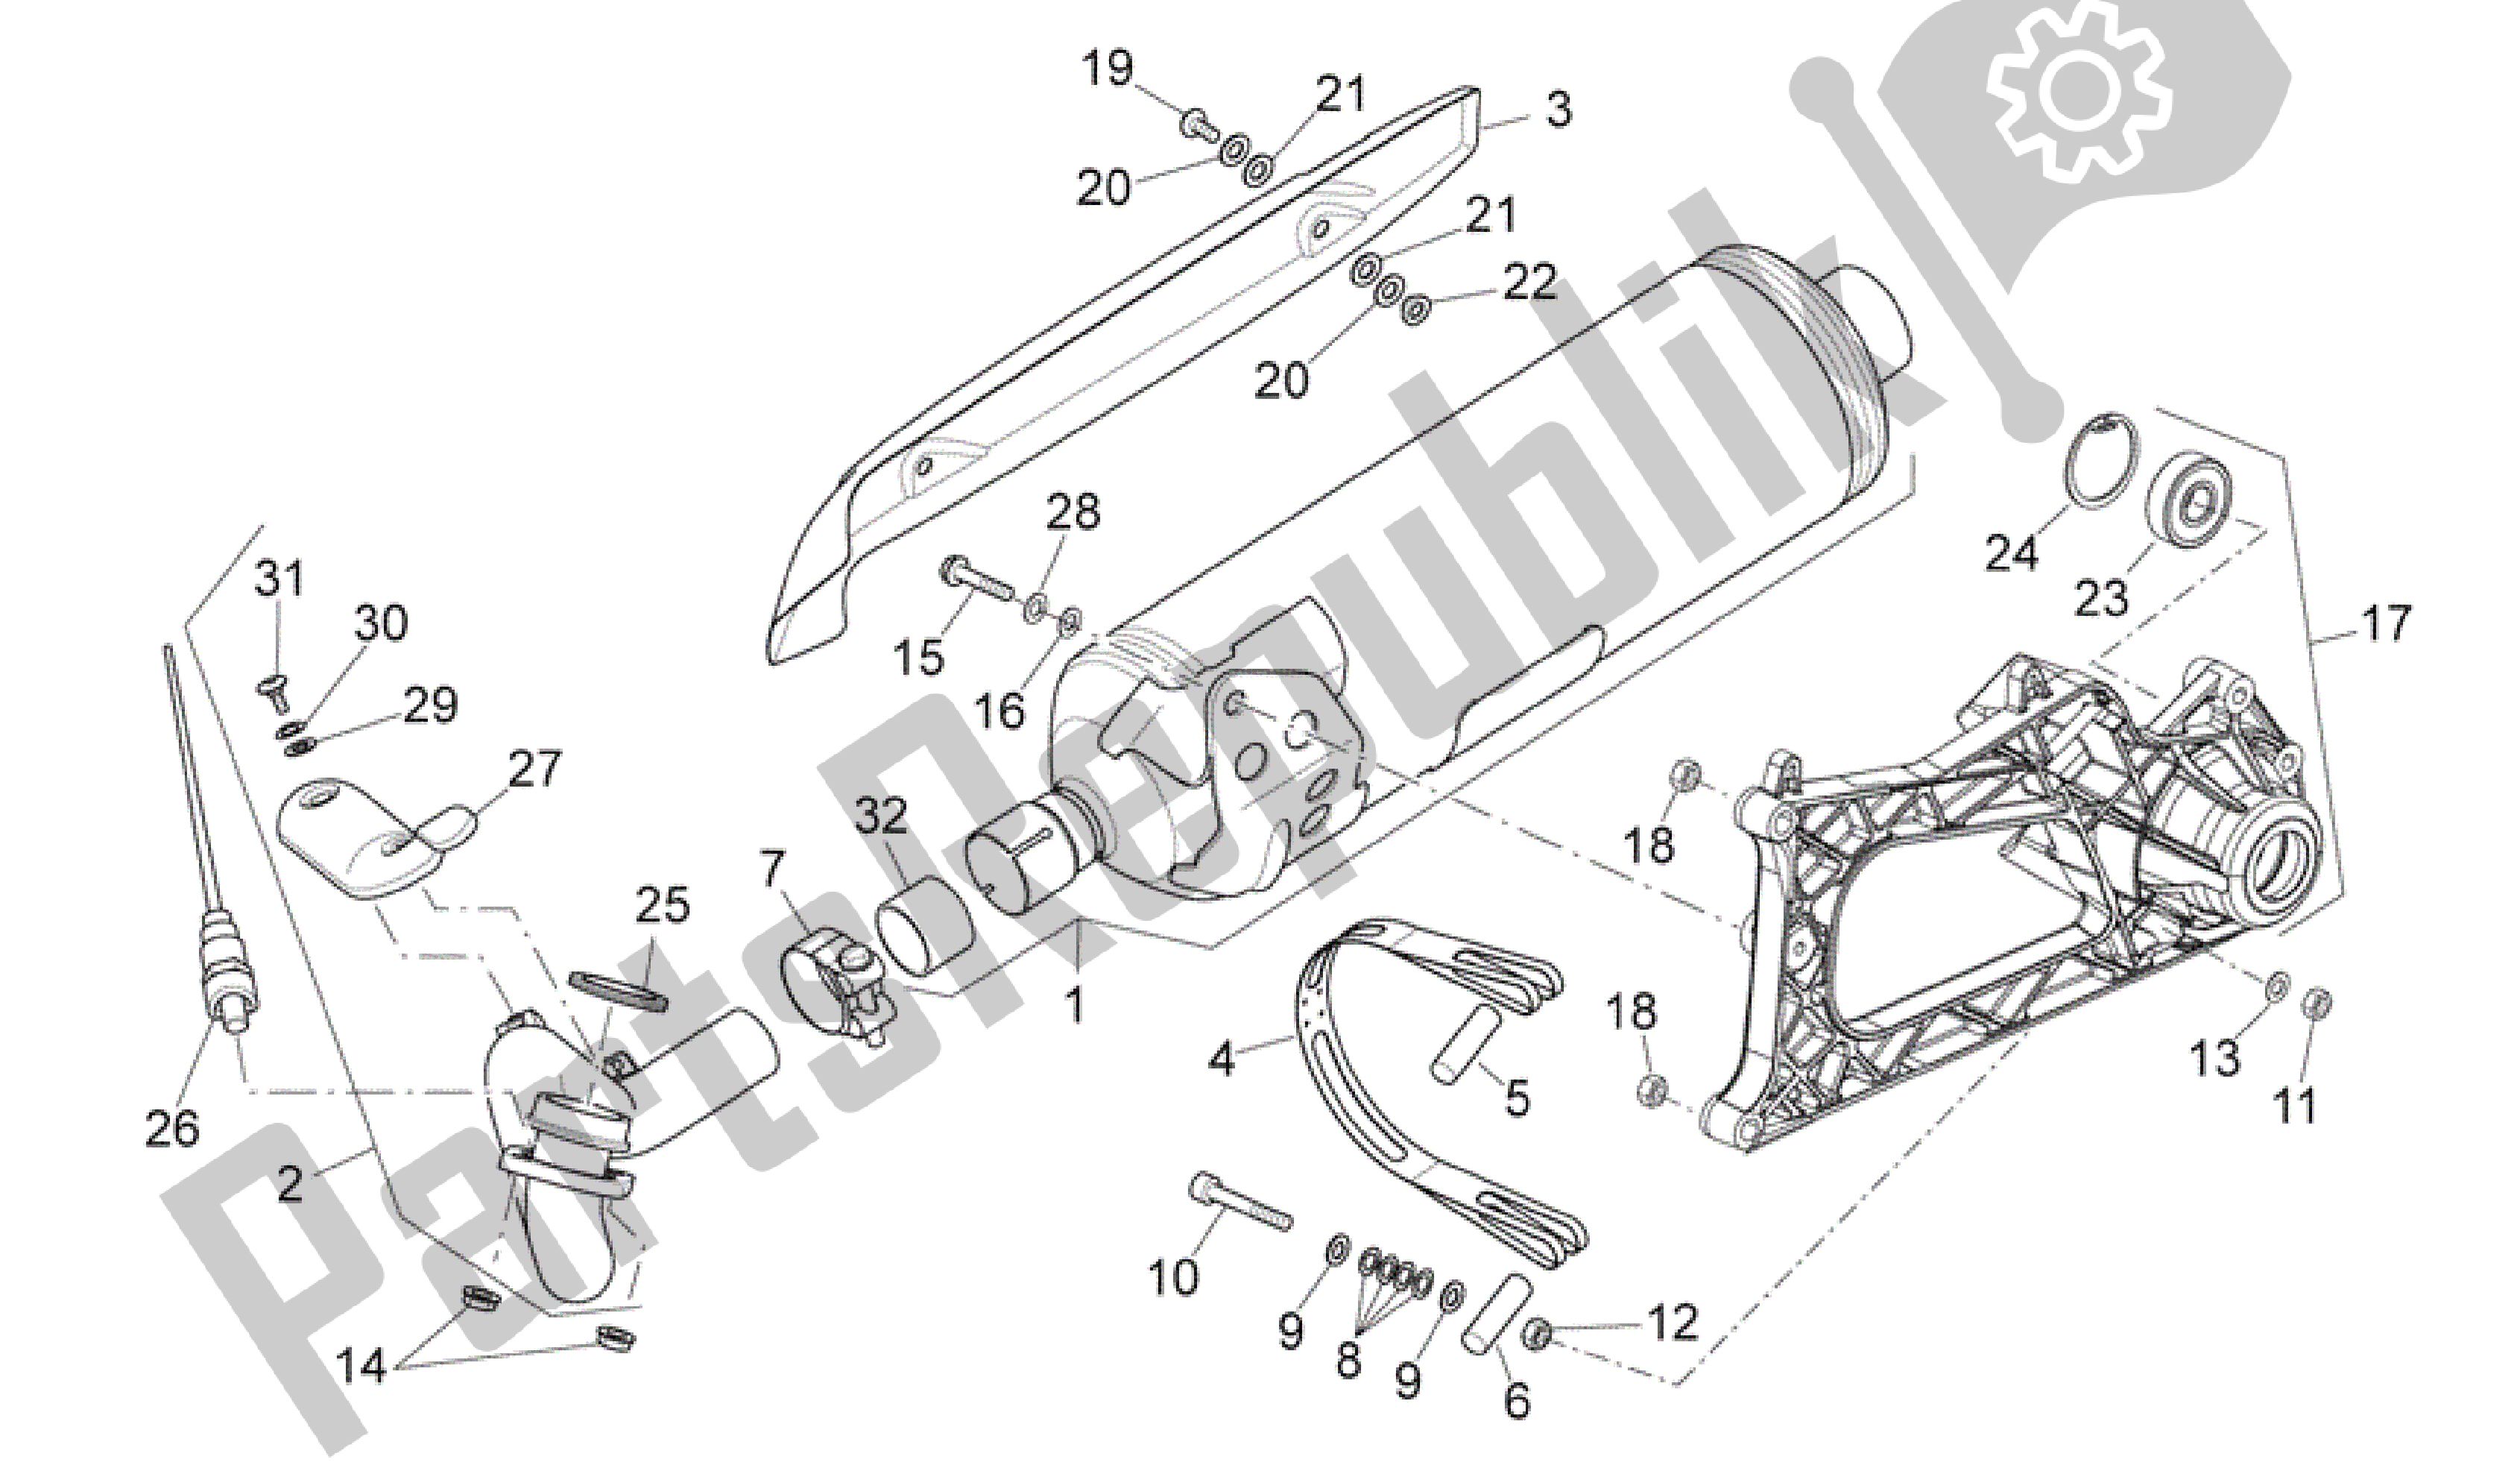 All parts for the Exhaust Unit of the Aprilia Scarabeo 492 2006 - 2008